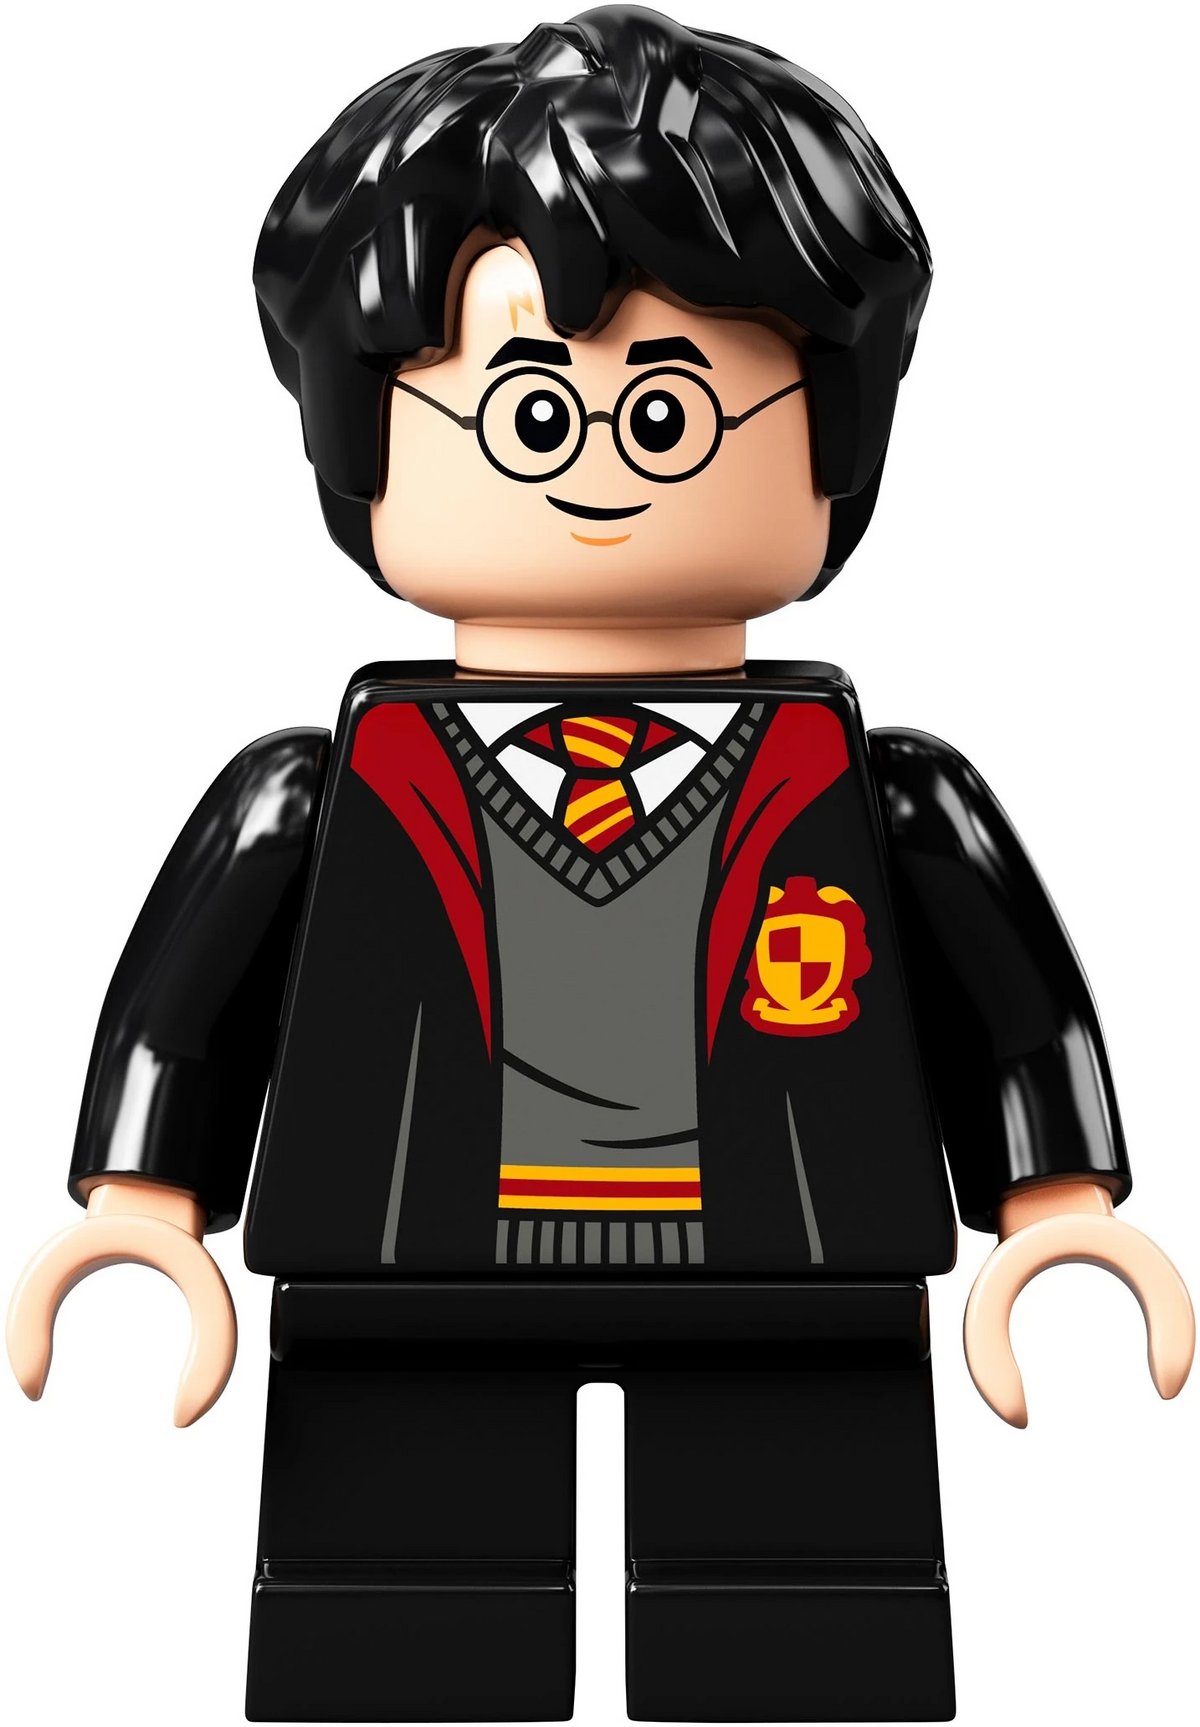  LEGO 2018 Harry Potter Minifigure - Harry Potter (with Owl,  Broom & Wand) 75954 : Toys & Games